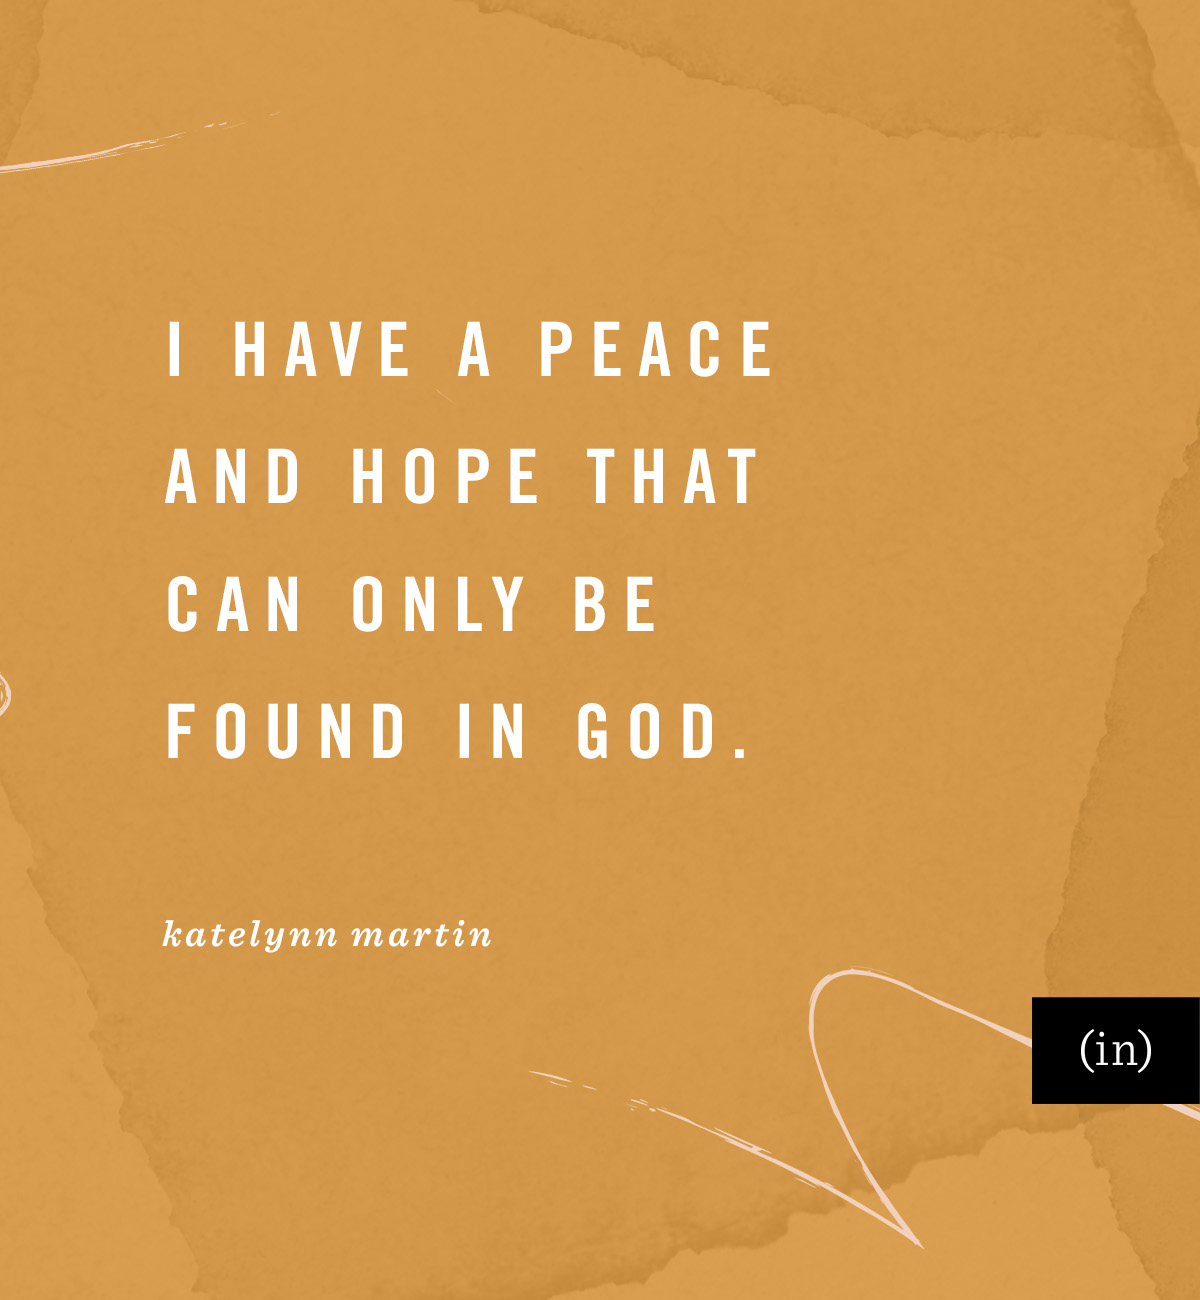 I have a peace and hope that can only be found in God. -Katelynn Martin